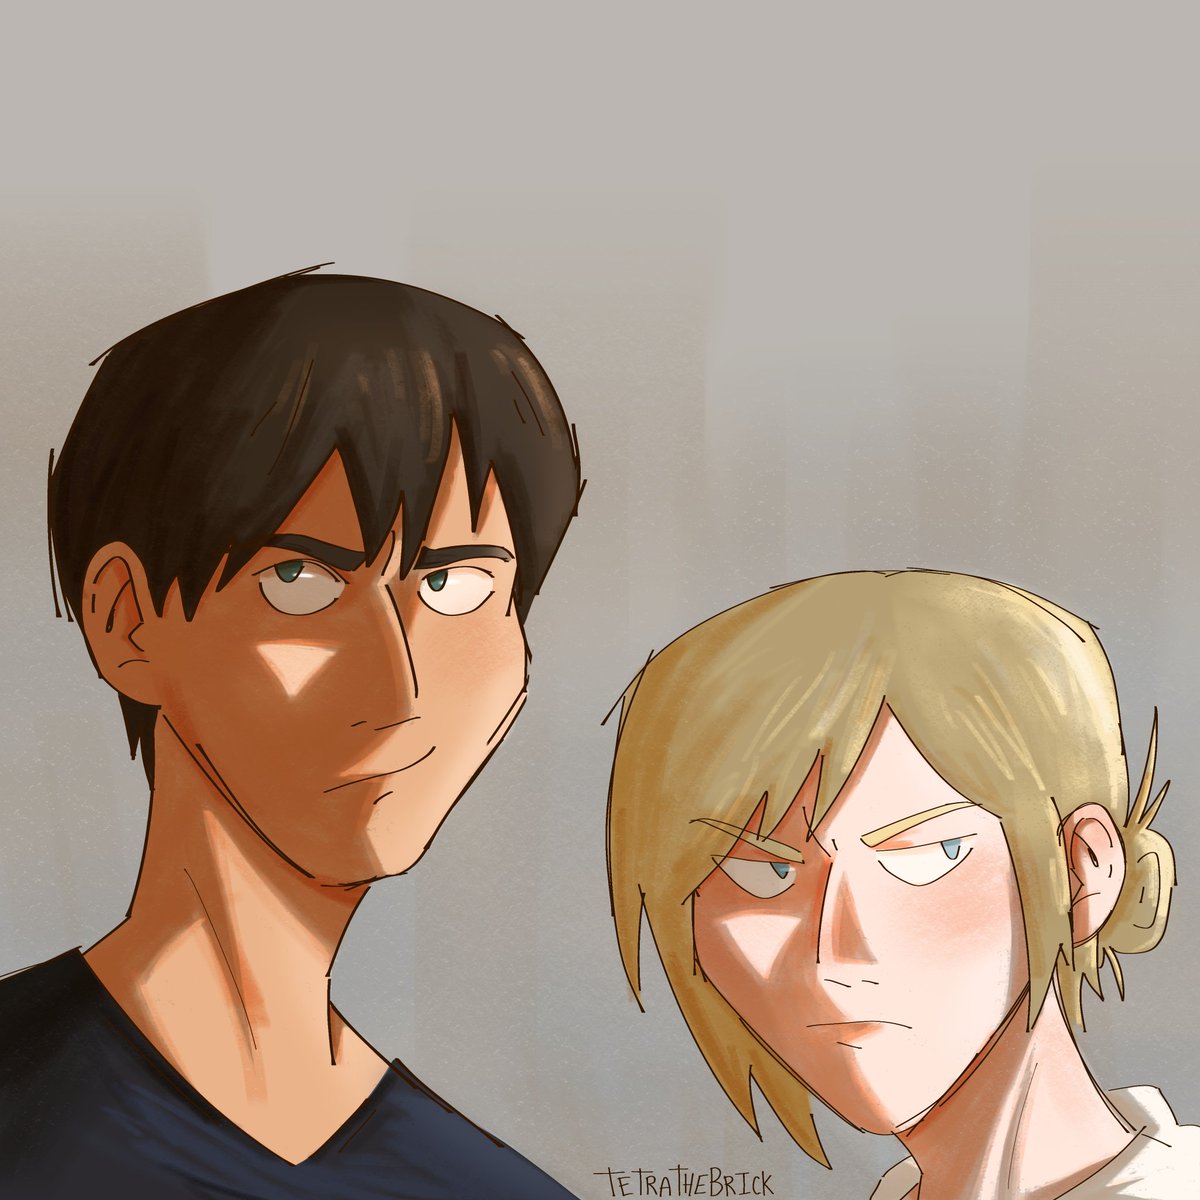 Have a crusty azz lightning practice today (feat annie and bert) 🫶
#attackontitan #annieleonhart #bertholdthoover #aotfanart #art